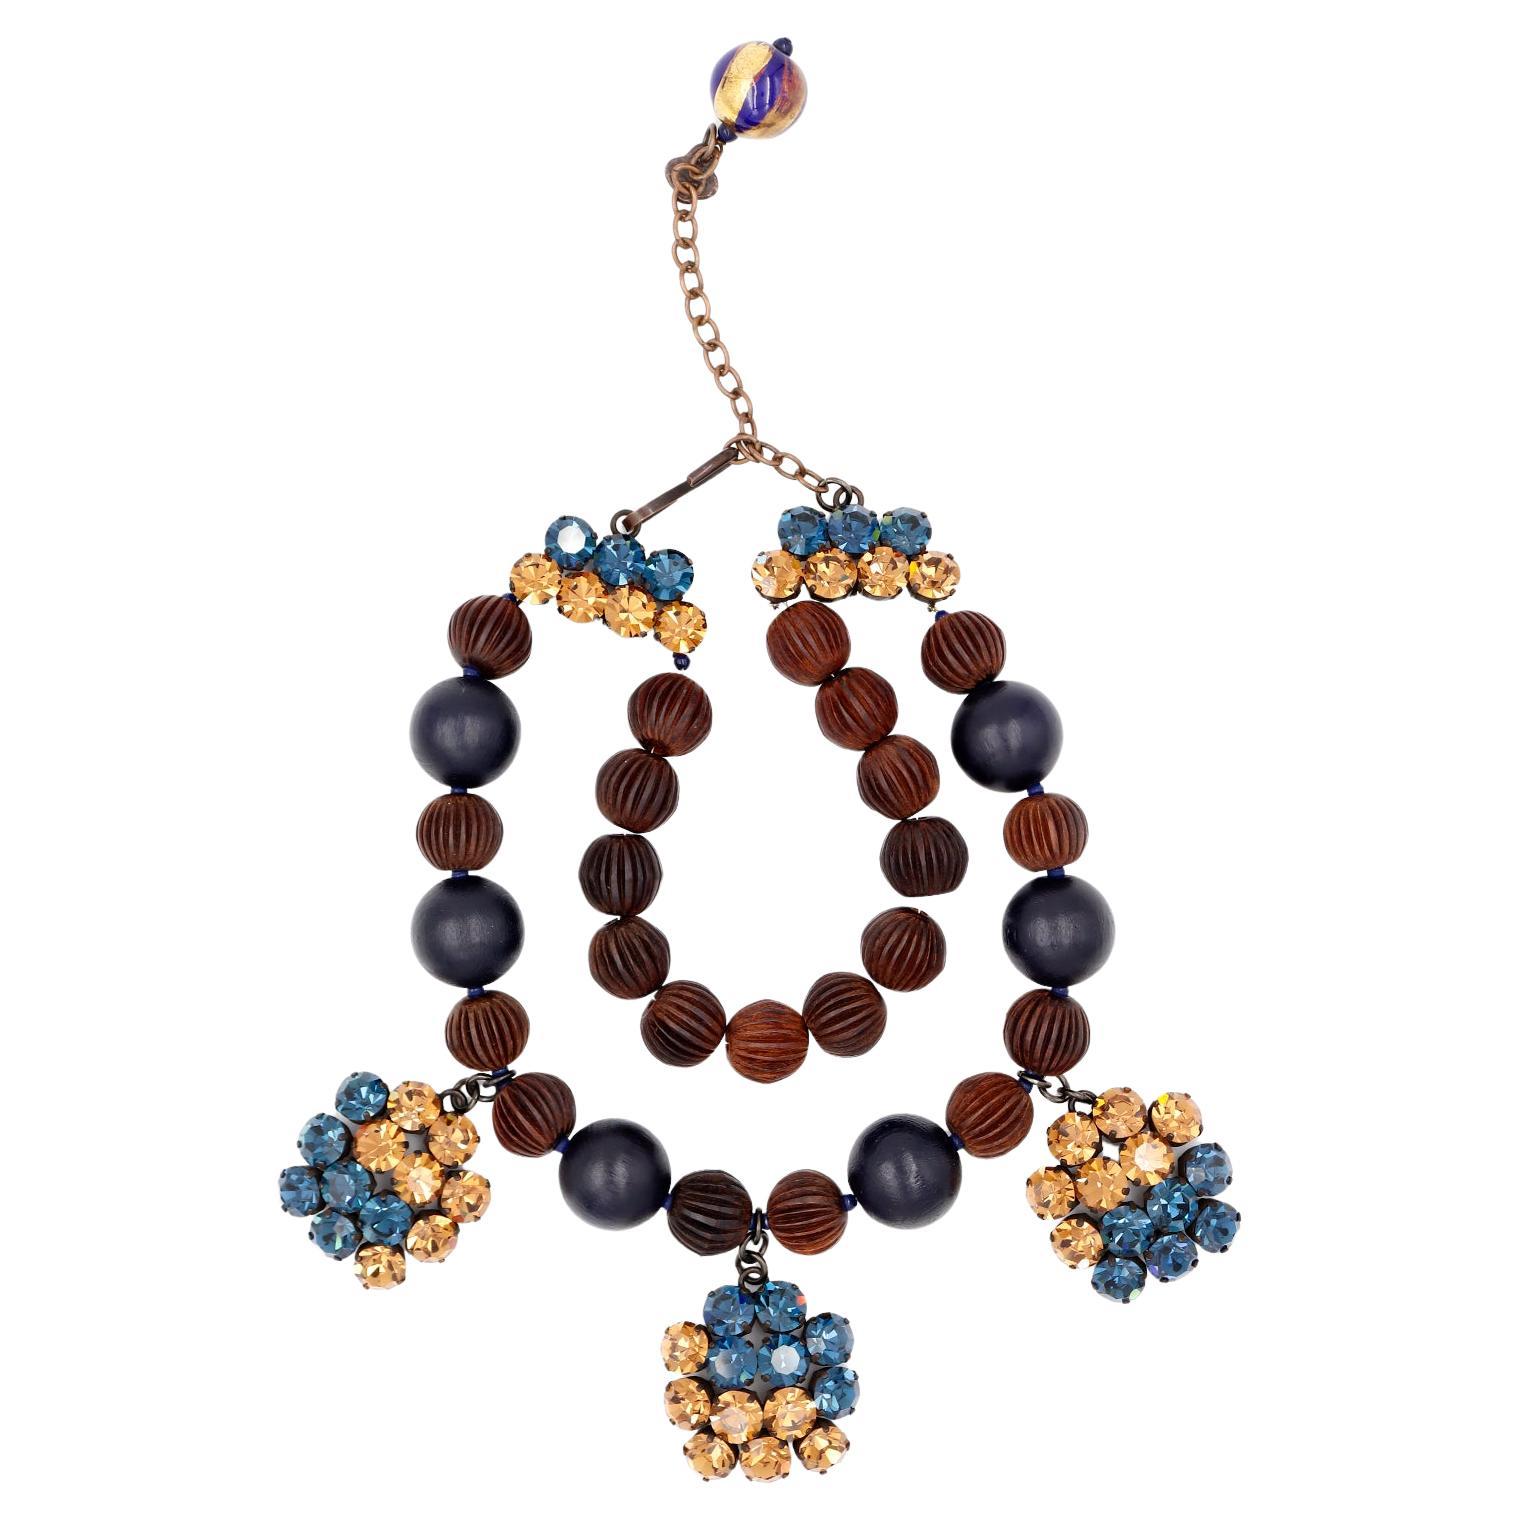 Yves Saint Laurent Vintage Textured Brown Beads w Blue & Gold Stones Necklace For Sale